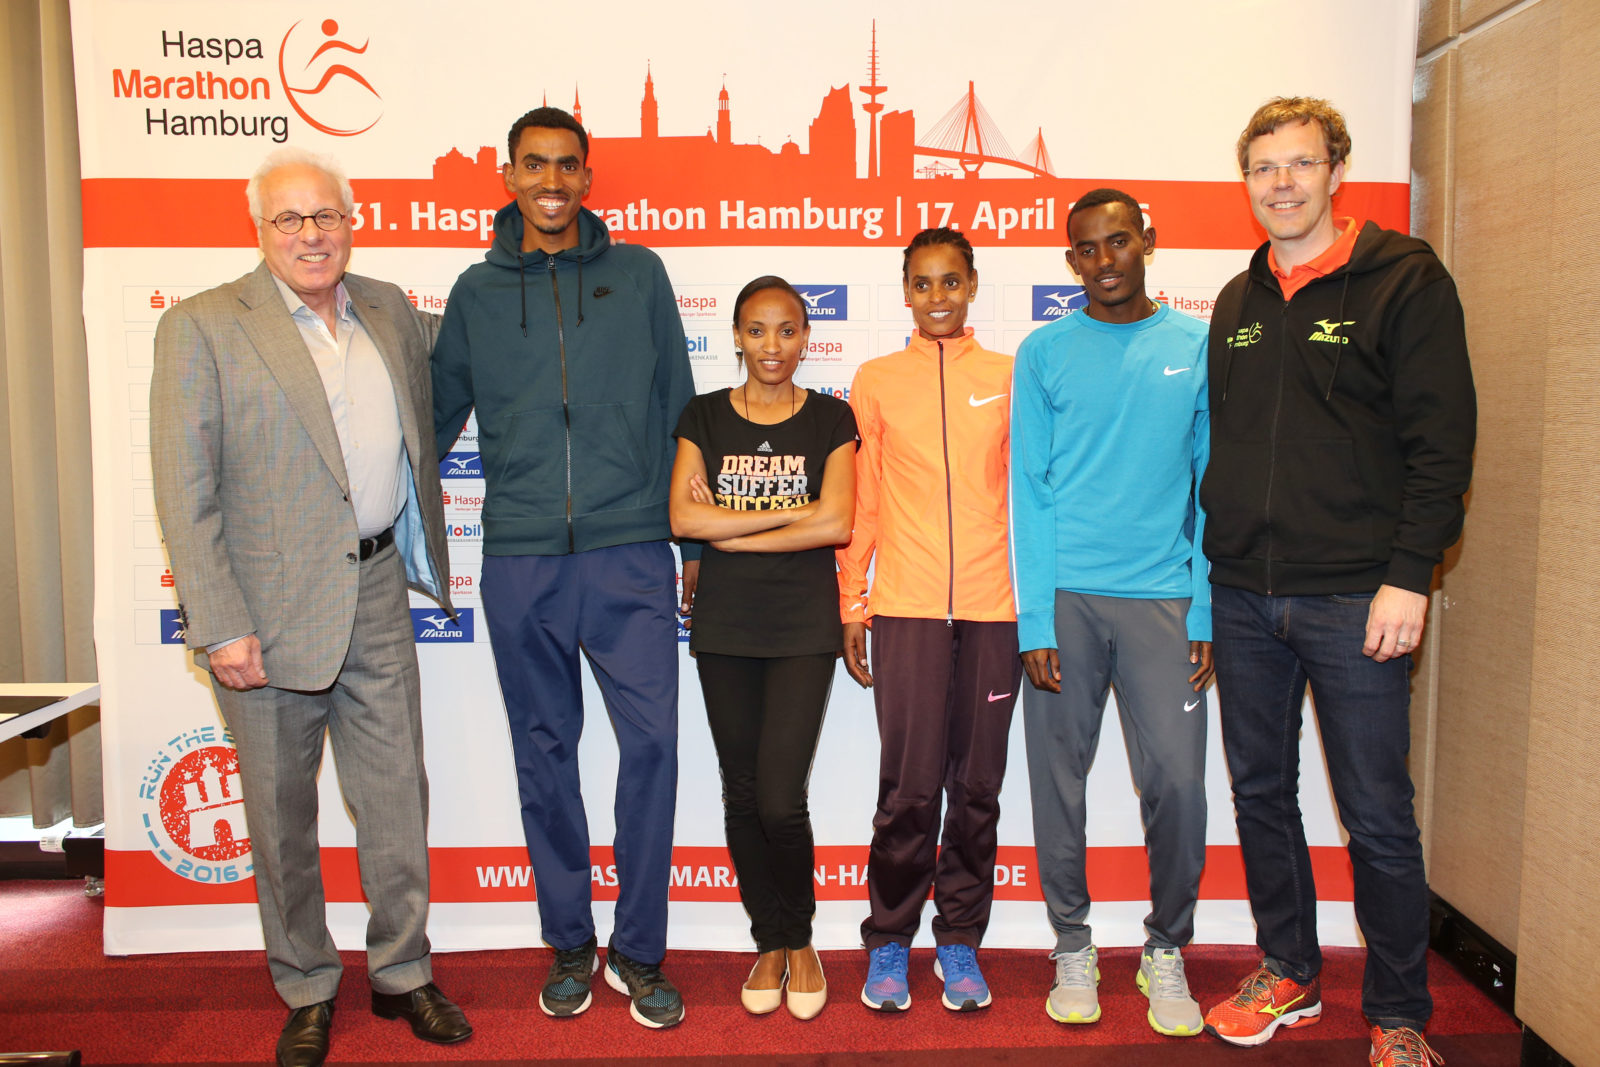 Ethiopians plan fast Hamburg race in battle for Olympic places